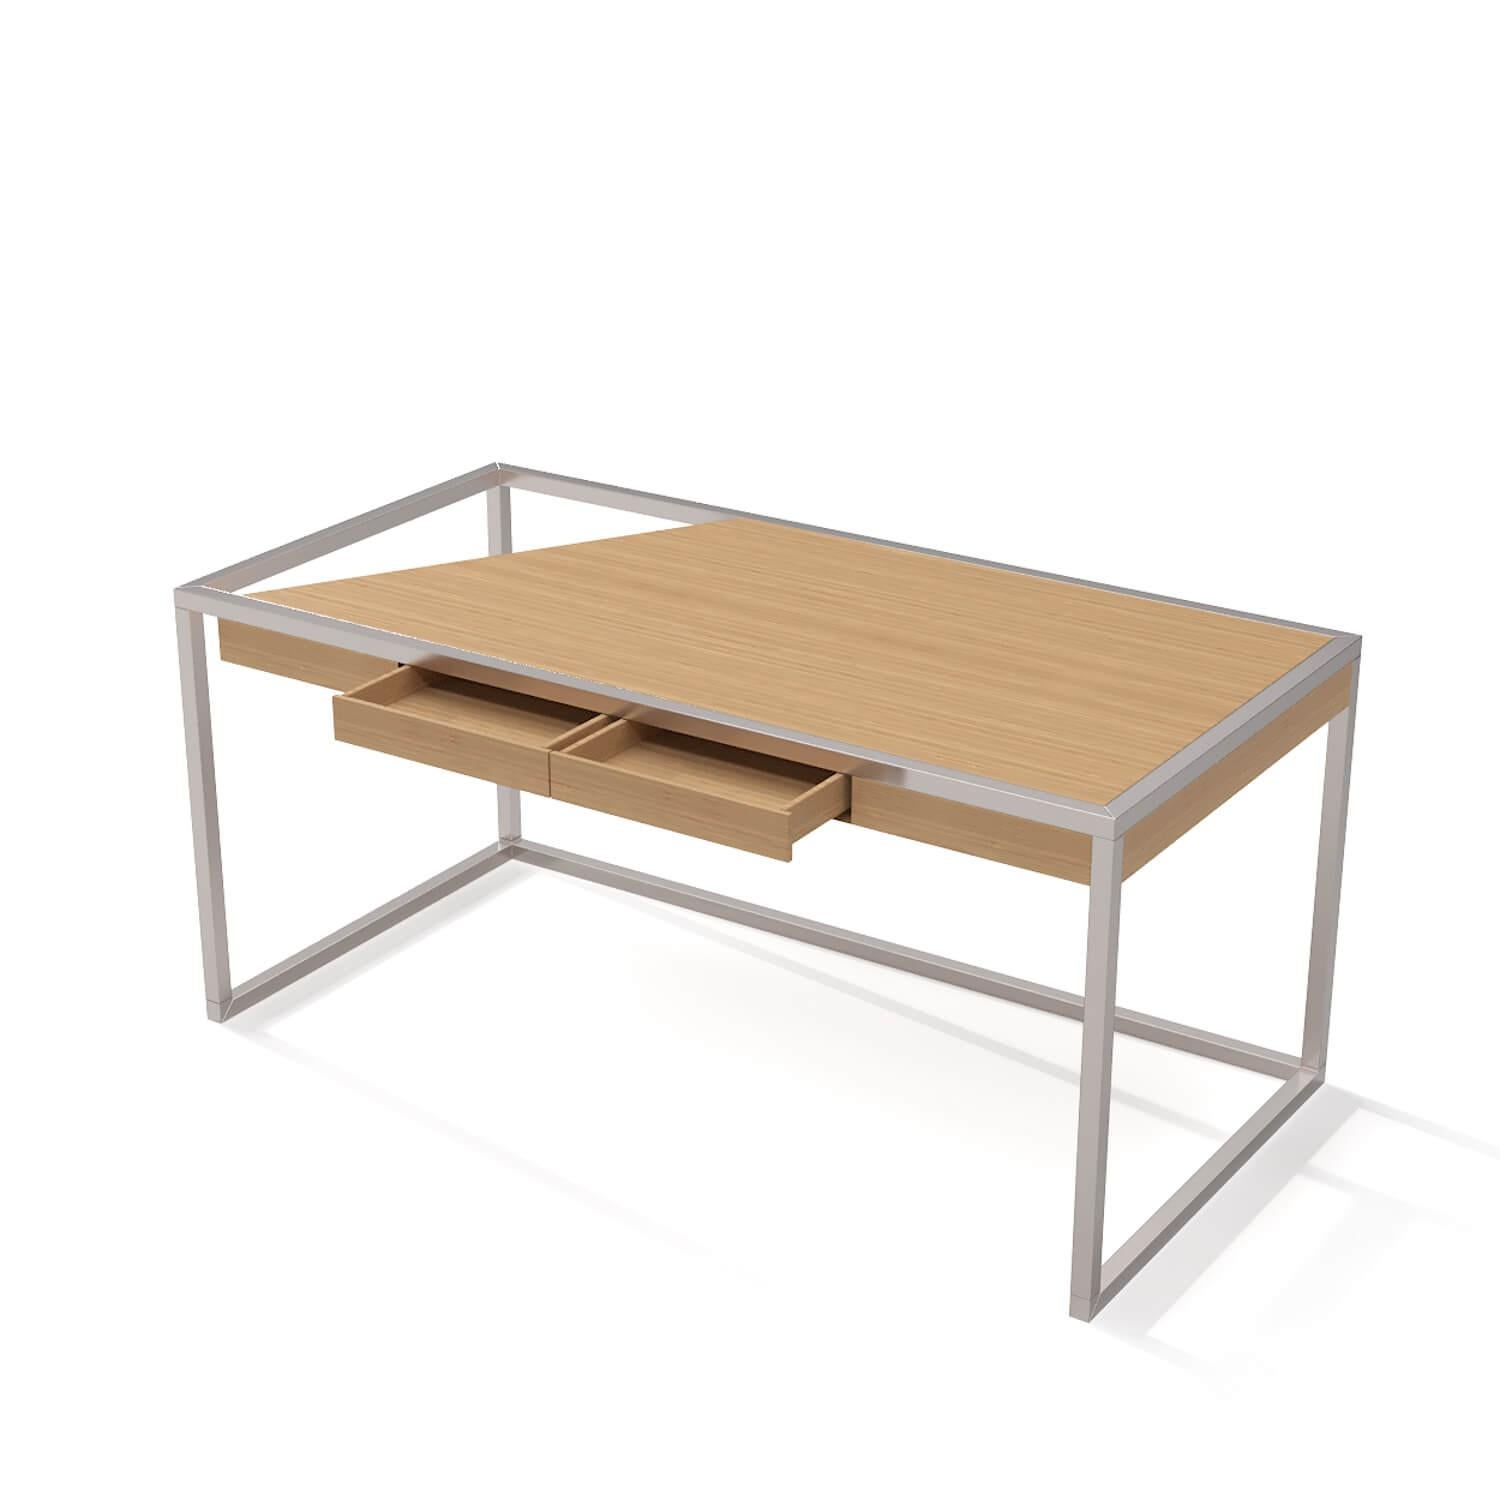 Modern Minimalist Home Office Writing Desk Oak Wood and Brushed Stainless Steel In New Condition For Sale In Vila Nova Famalicão, PT